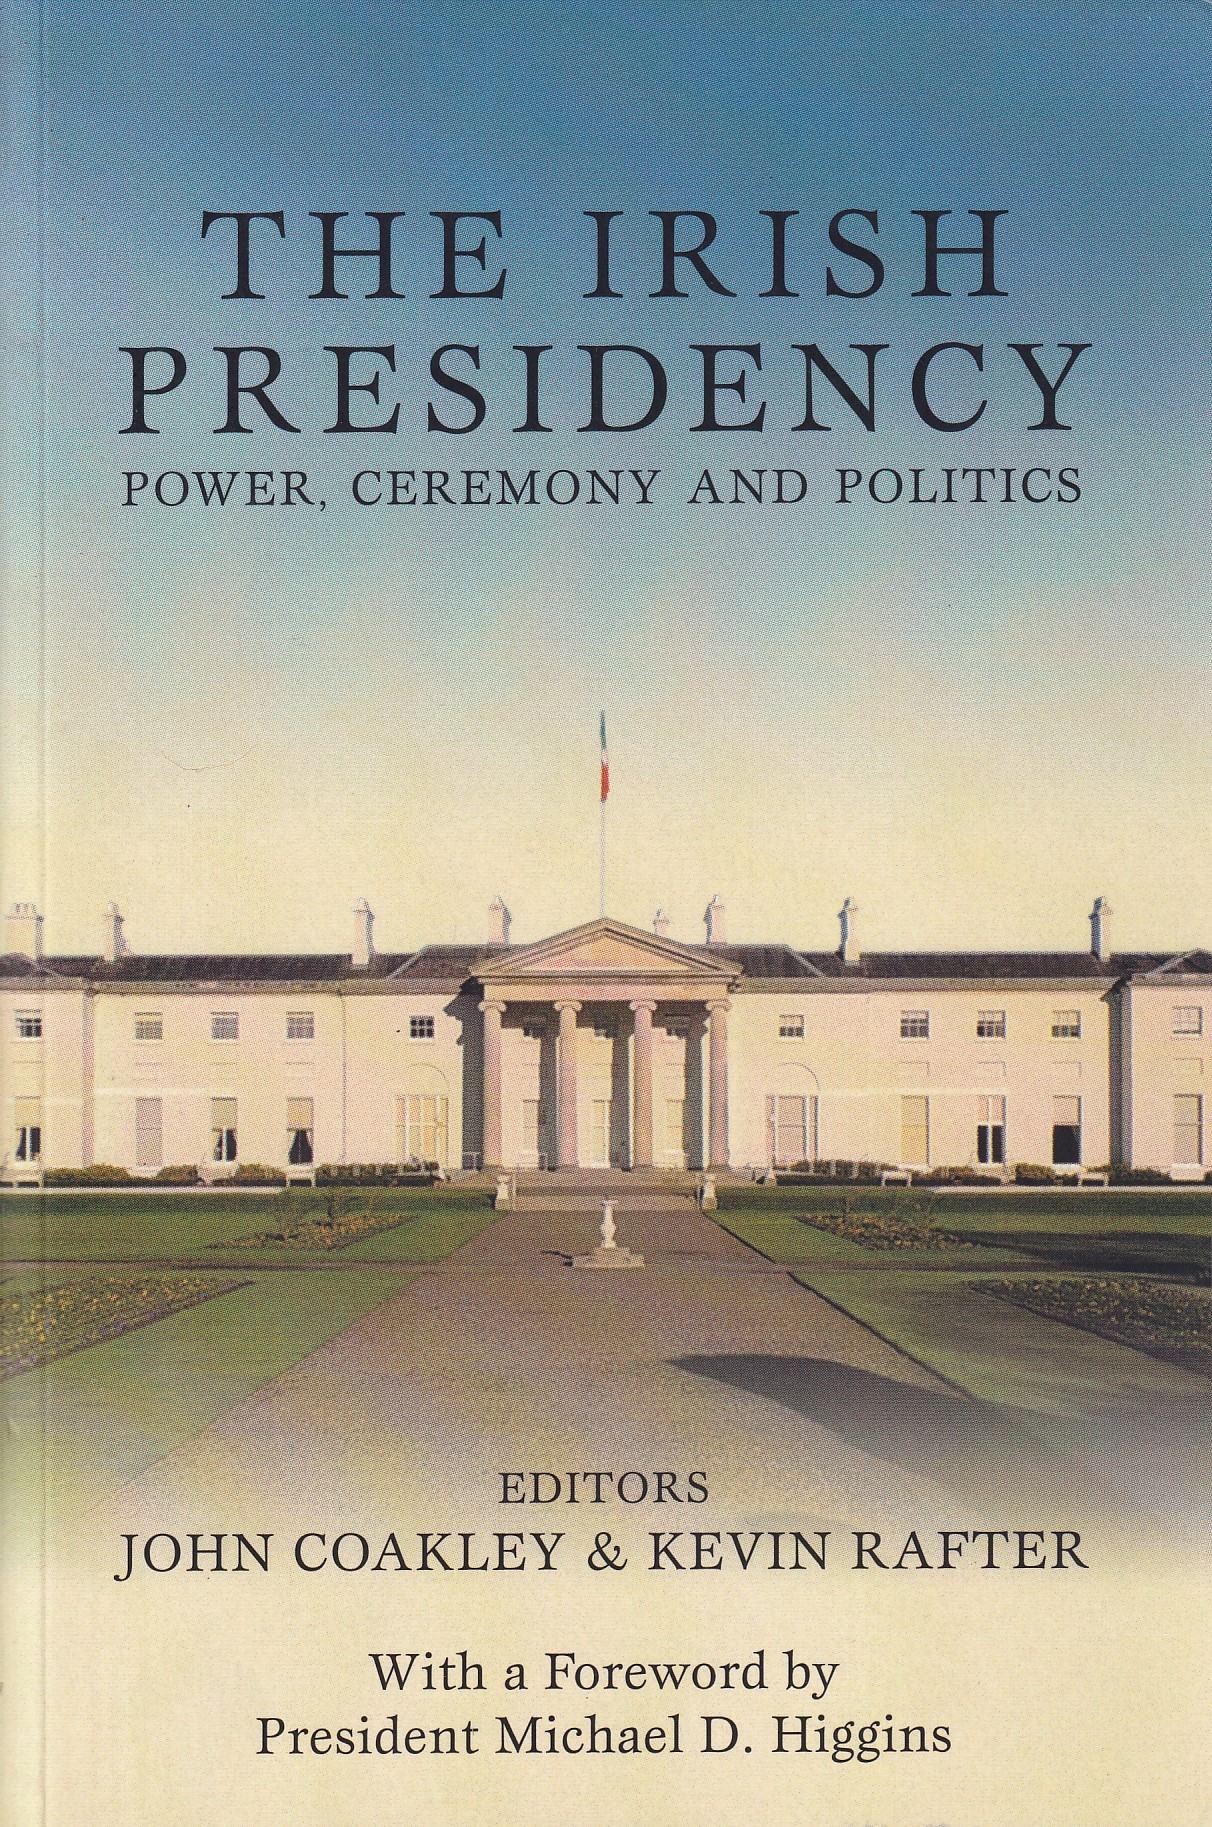 The Irish Presidency: Power, Ceremony and Politics by John Coakley & Kevin Rafter (eds.)